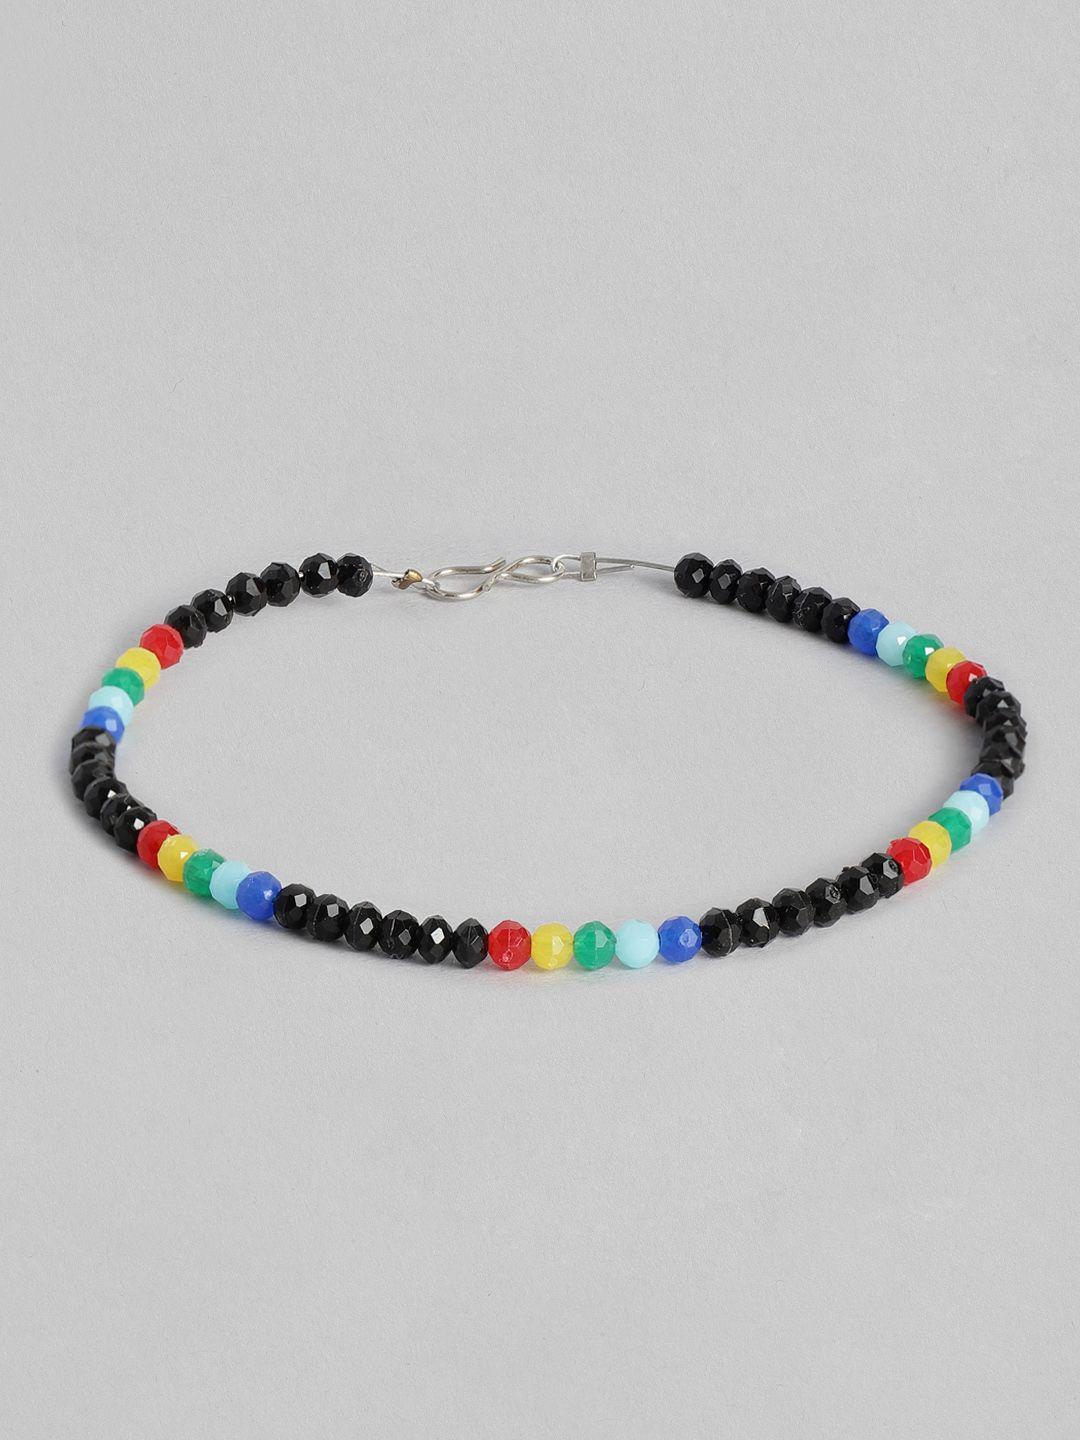 sangria beads studded anklet